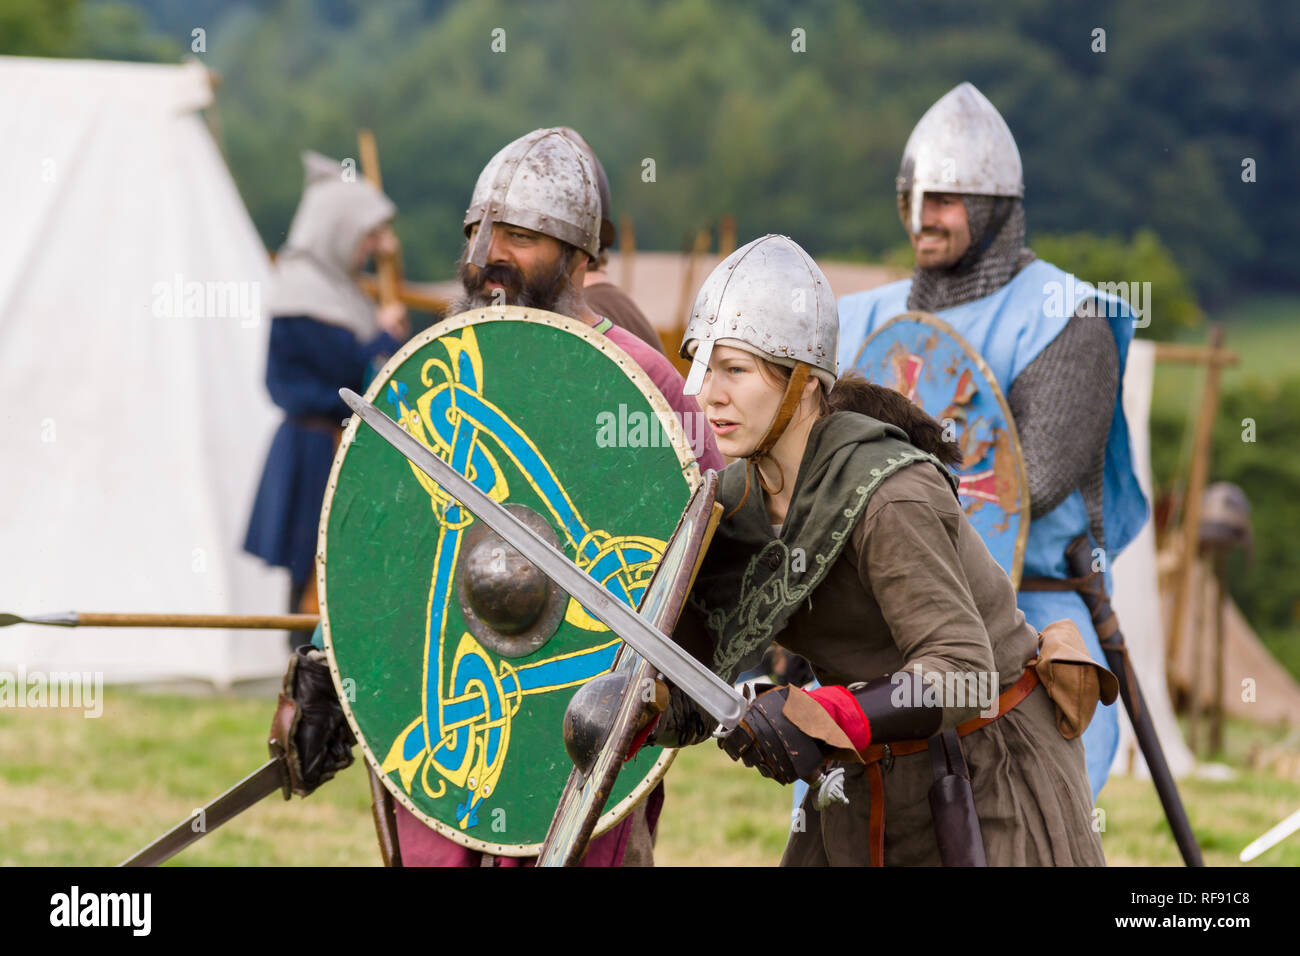 Medieval re-enactors dressed in armour and costumes of the 12th century equipped with swords and shields re-enacting combat of the period Stock Photo